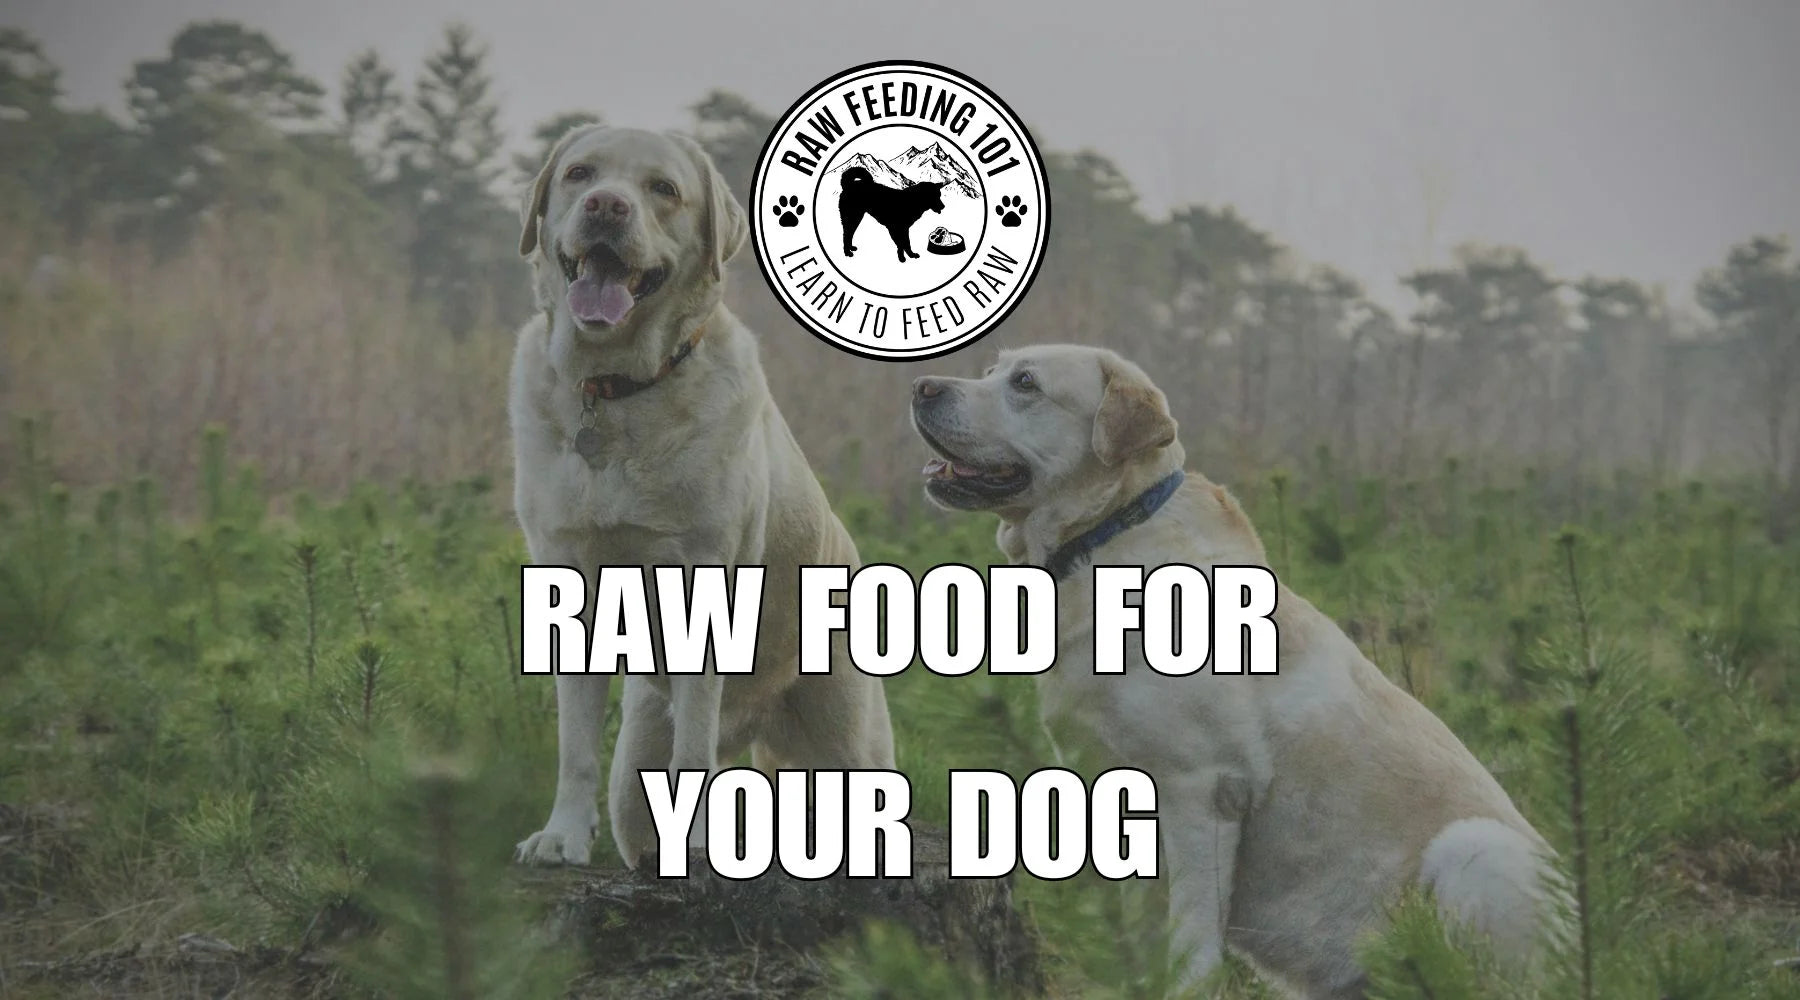 How much raw food should your dog eat?